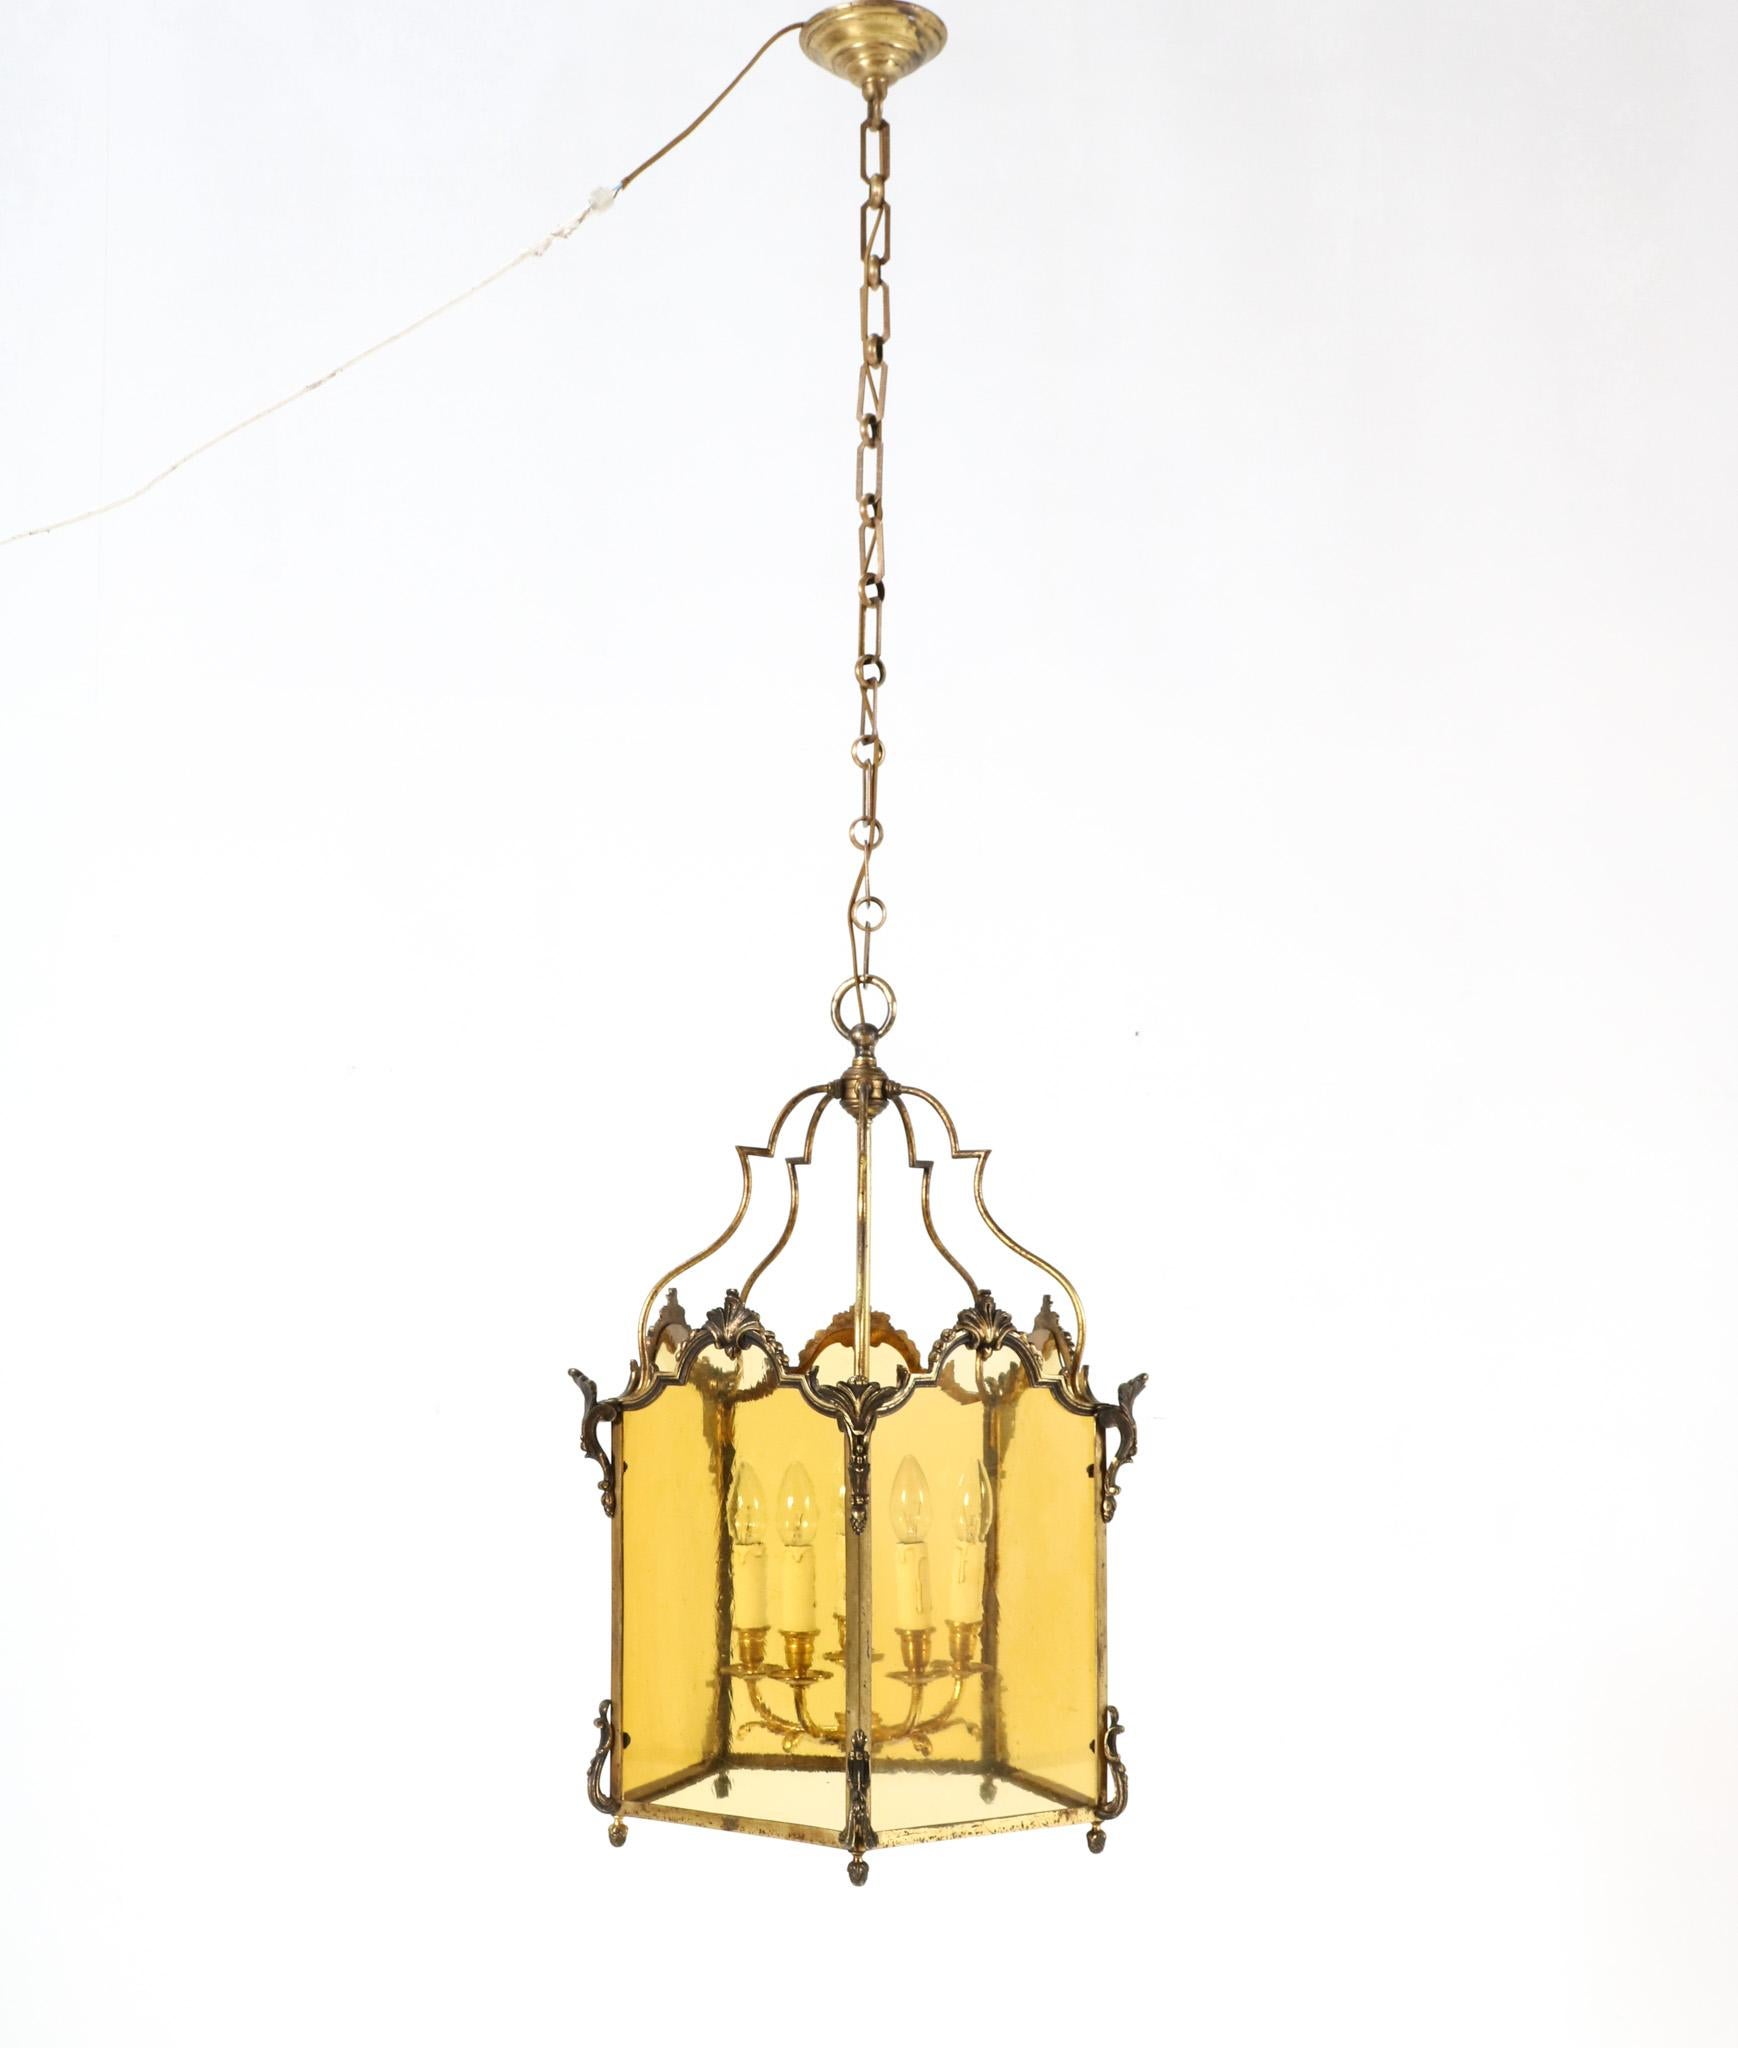 Magnificent and elegant 19th Century Louis XV style hall lantern.
Striking French design from the 1870s.
Original gilt bronze doré shell-crested frame with five original yellow colored hand-blown glass panels.
Originally for candles, this hall